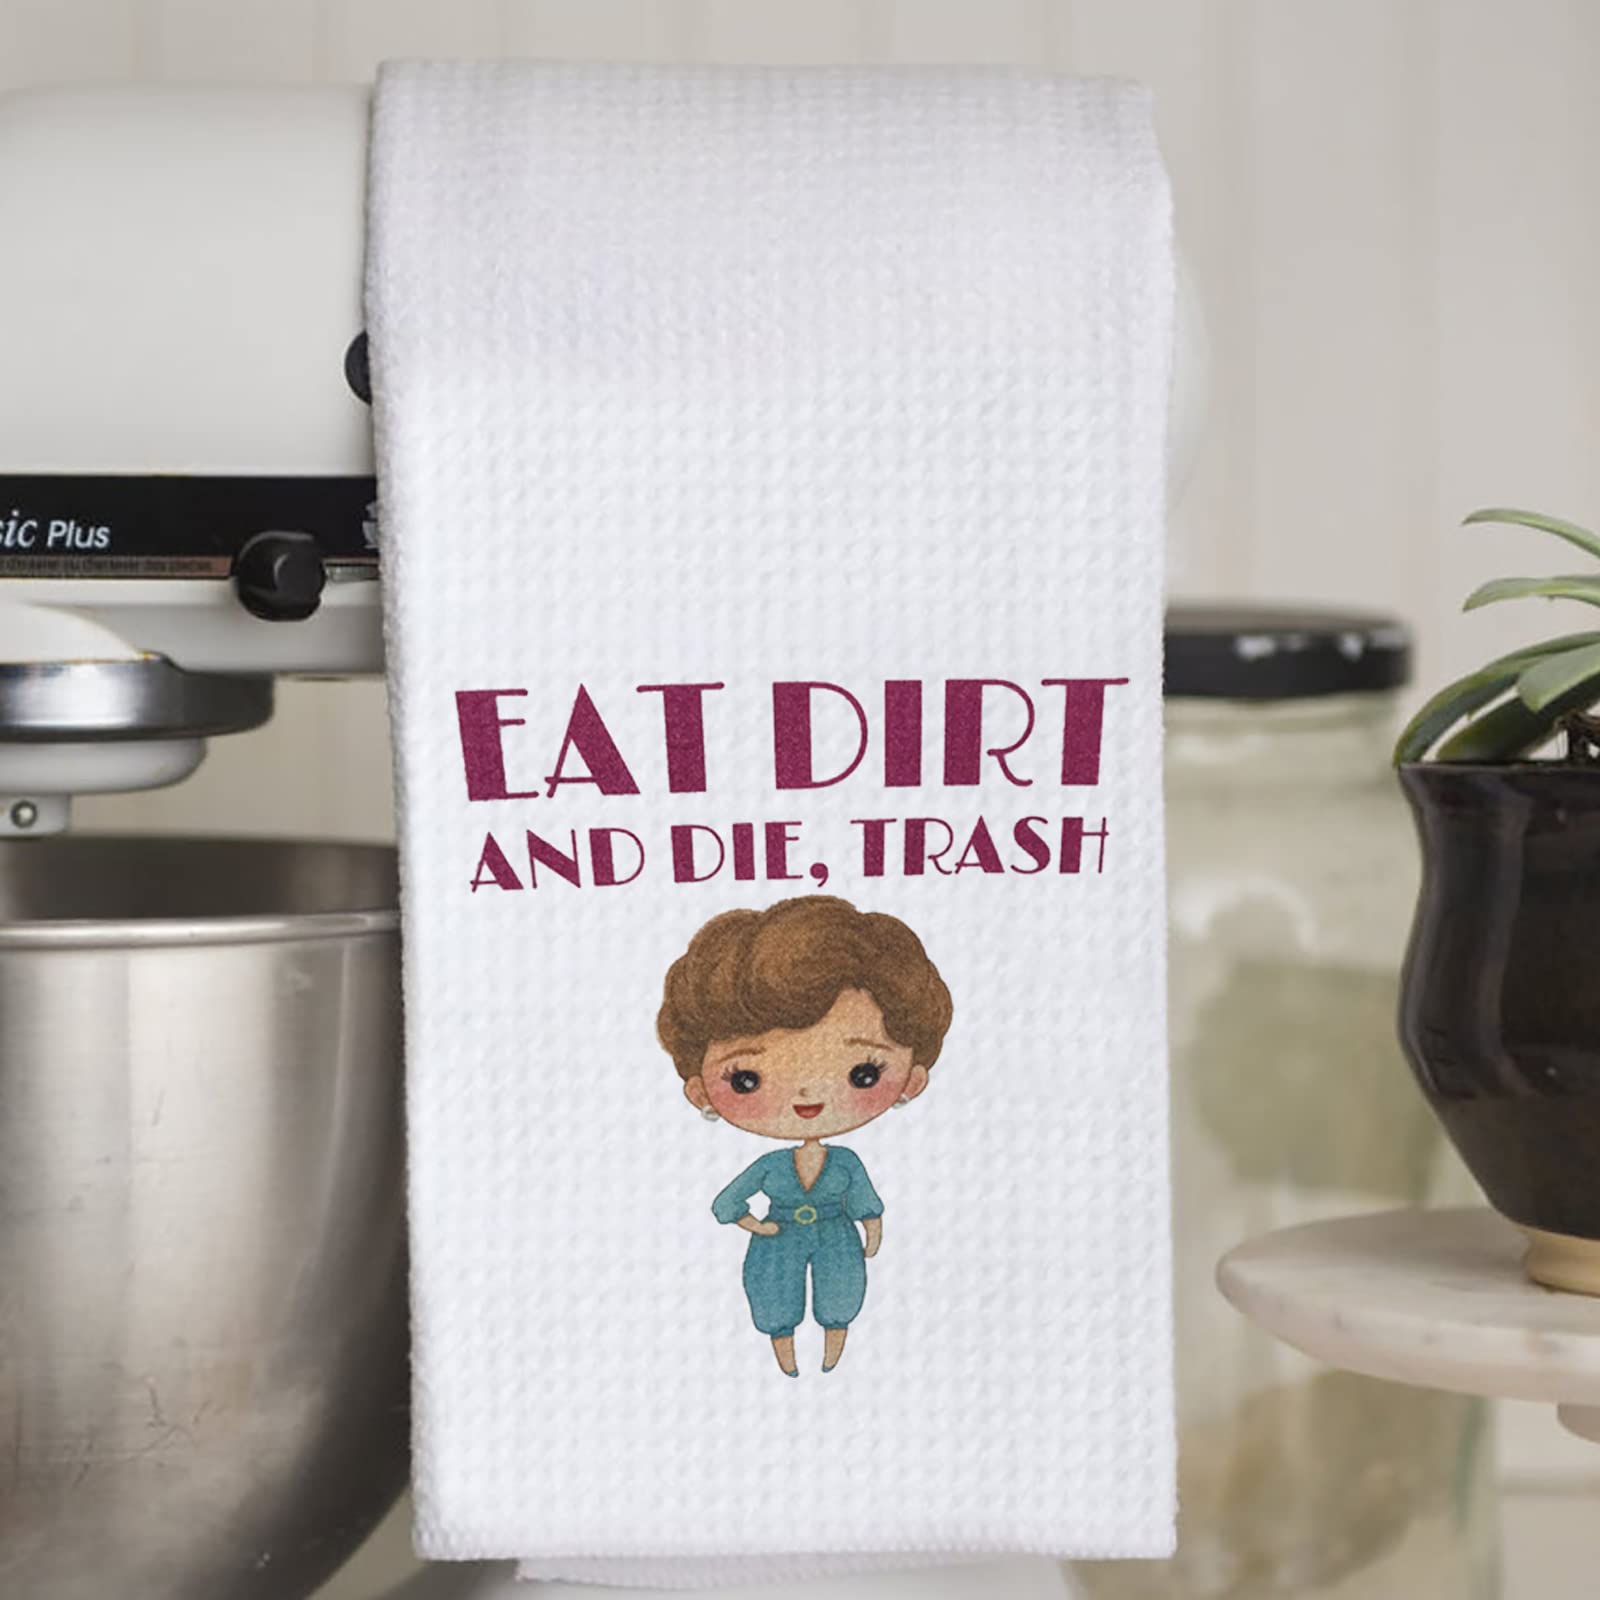 WCGXKO Funny TV Show Inspired Dorothy Quote Eat Dirt and Die Trash Cute Housewarming Gift Novelty Dish Towel (Eat Dirt and Die Trash)